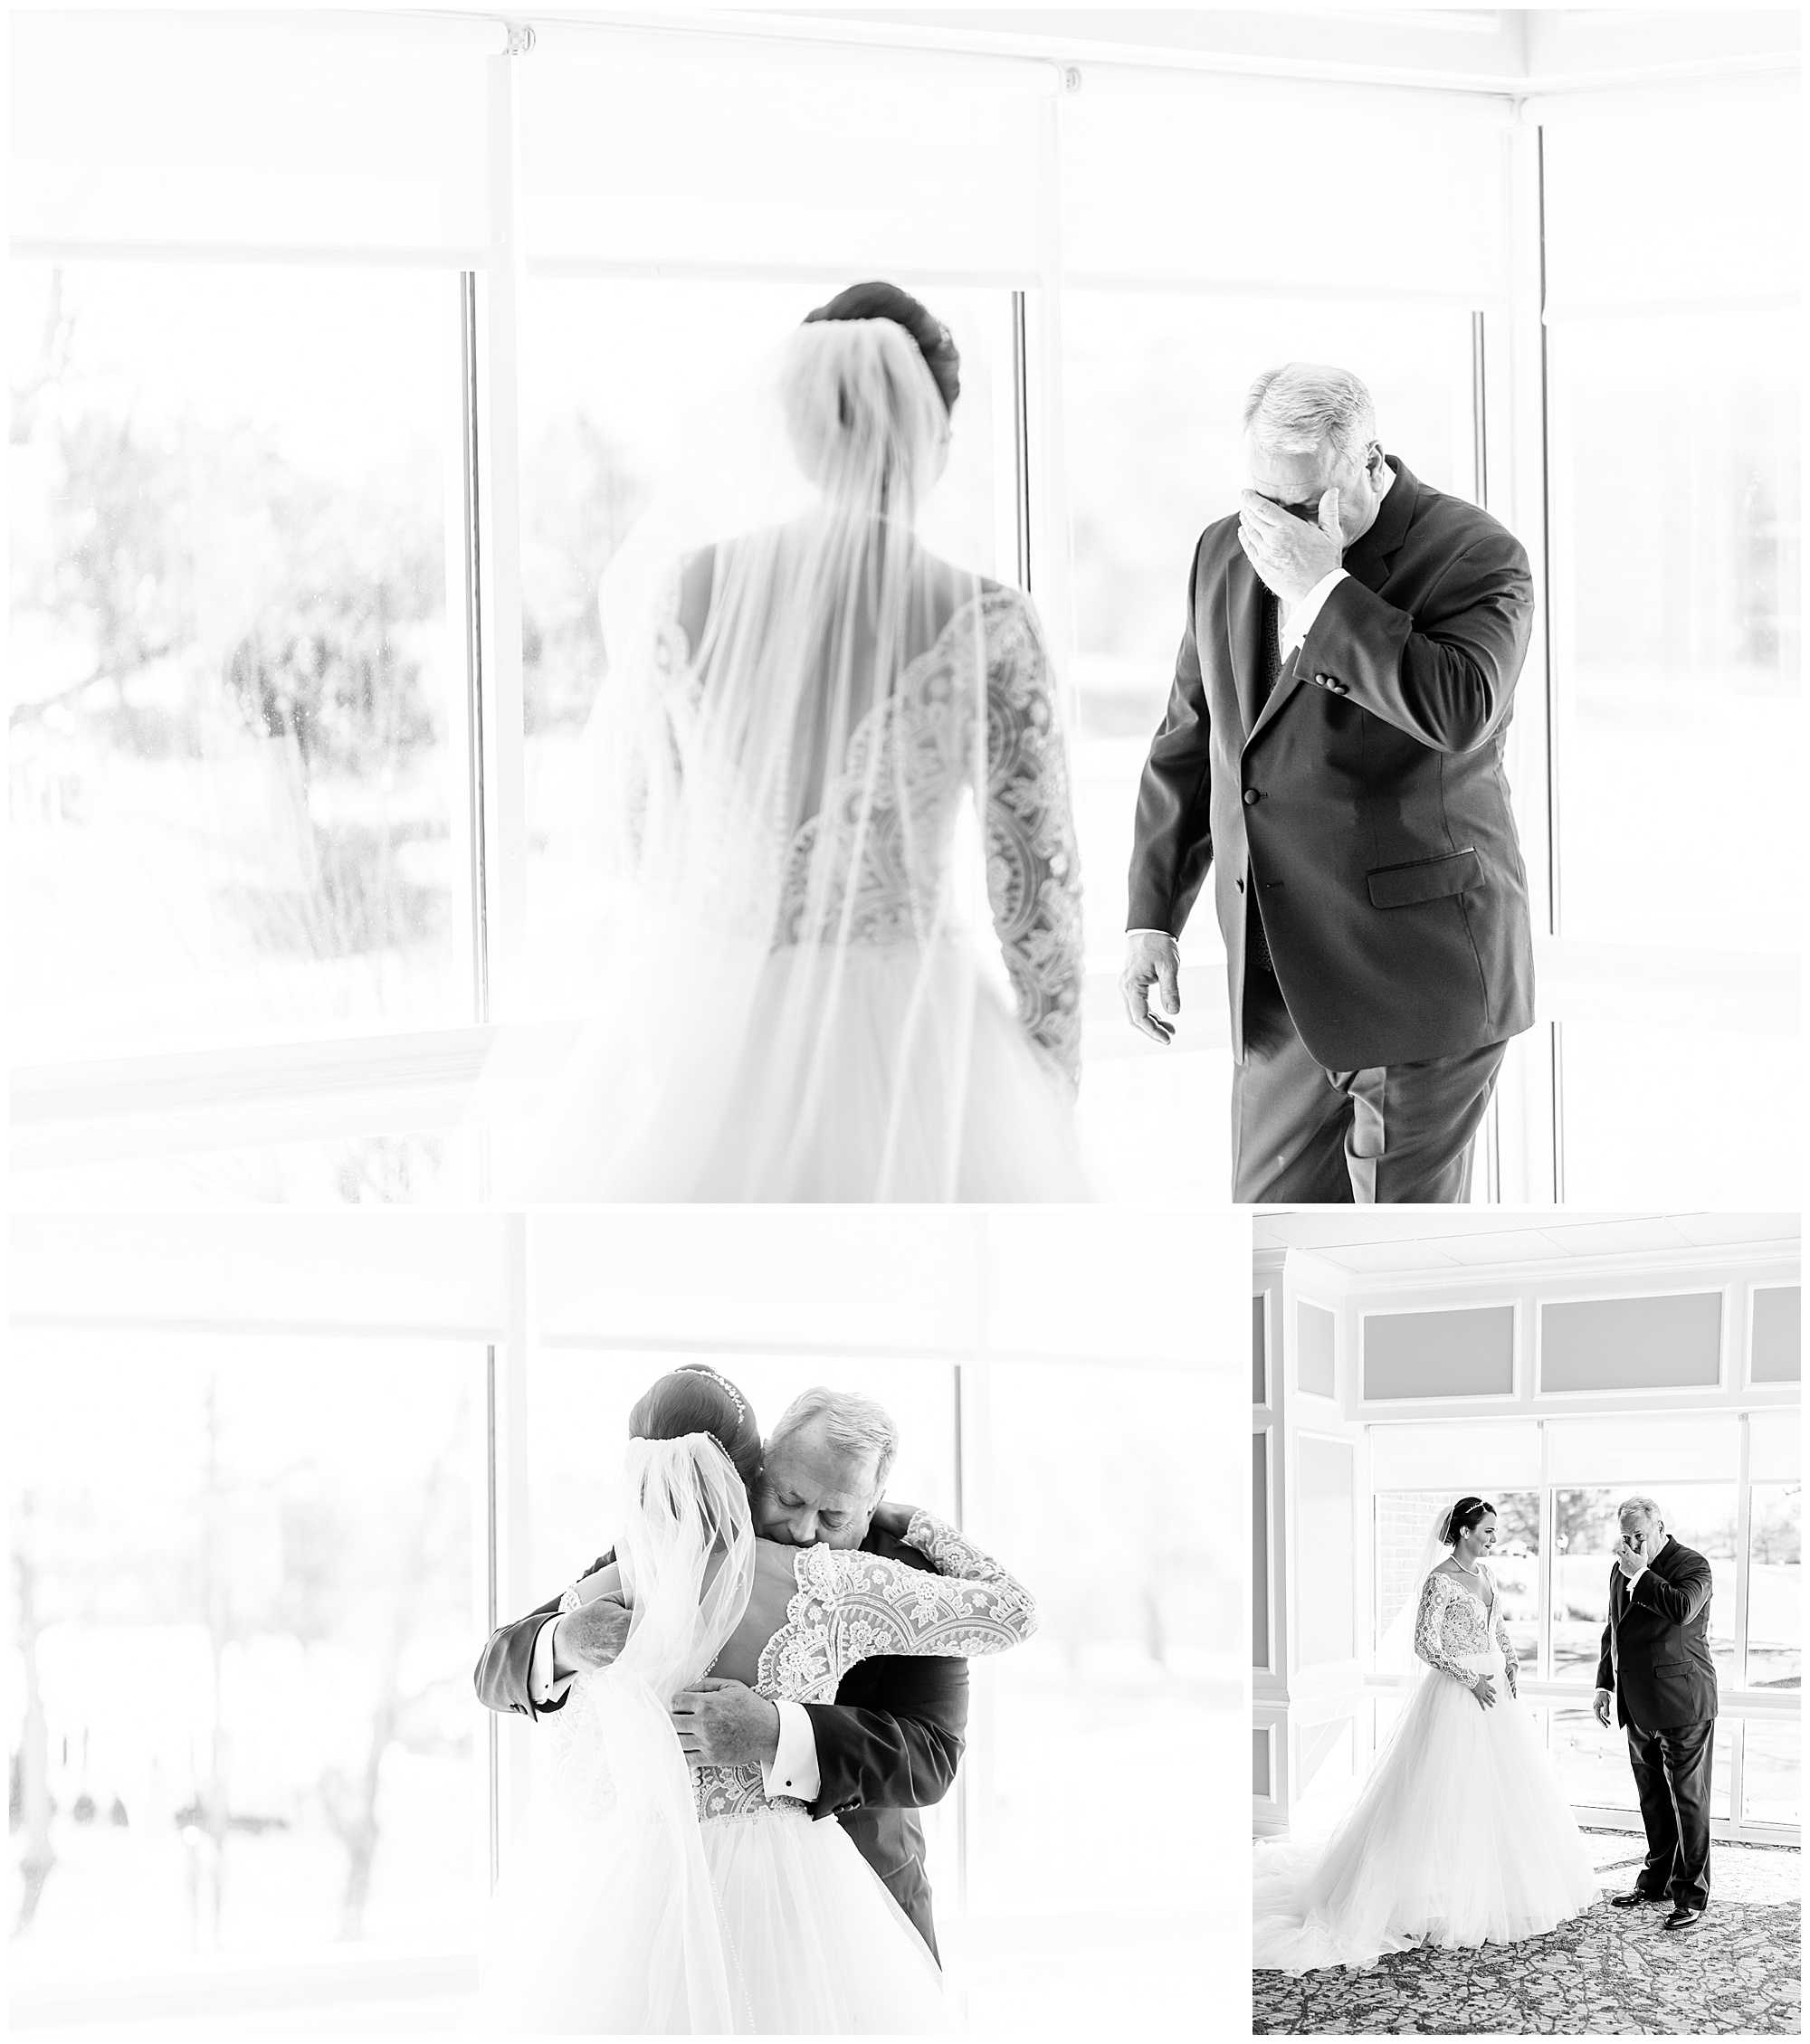 royal inspired Country Club of Fairfax wedding, Fairfax VA photographer, country club wedding, DC area country club, DC country club wedding, DC wedding photography, northern Virginia wedding photography,DC wedding photographer, golf course wedding, winter wedding, royals inspired wedding, Rachel E.H. Photography, father of bride tearing up, bride hugging father, wedding first look